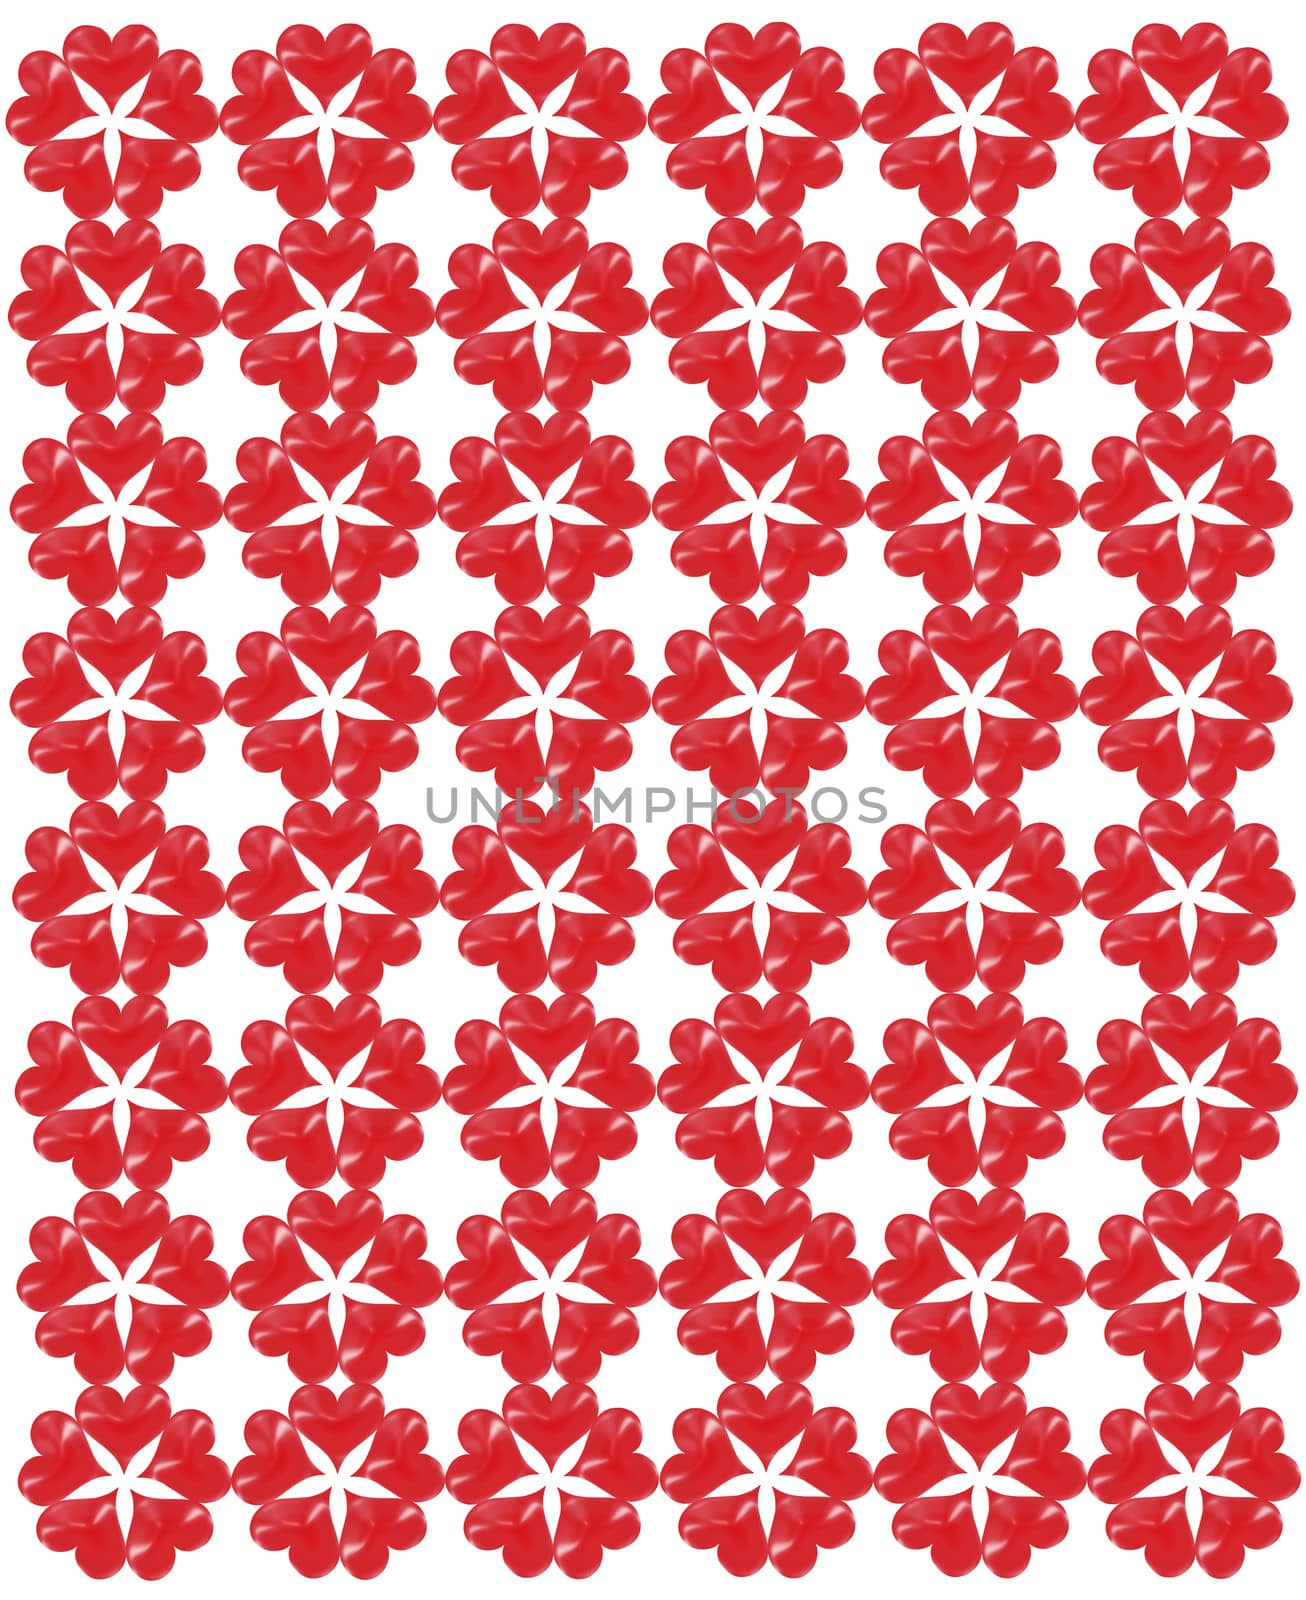 pattern from red shapes like laces by alexmak